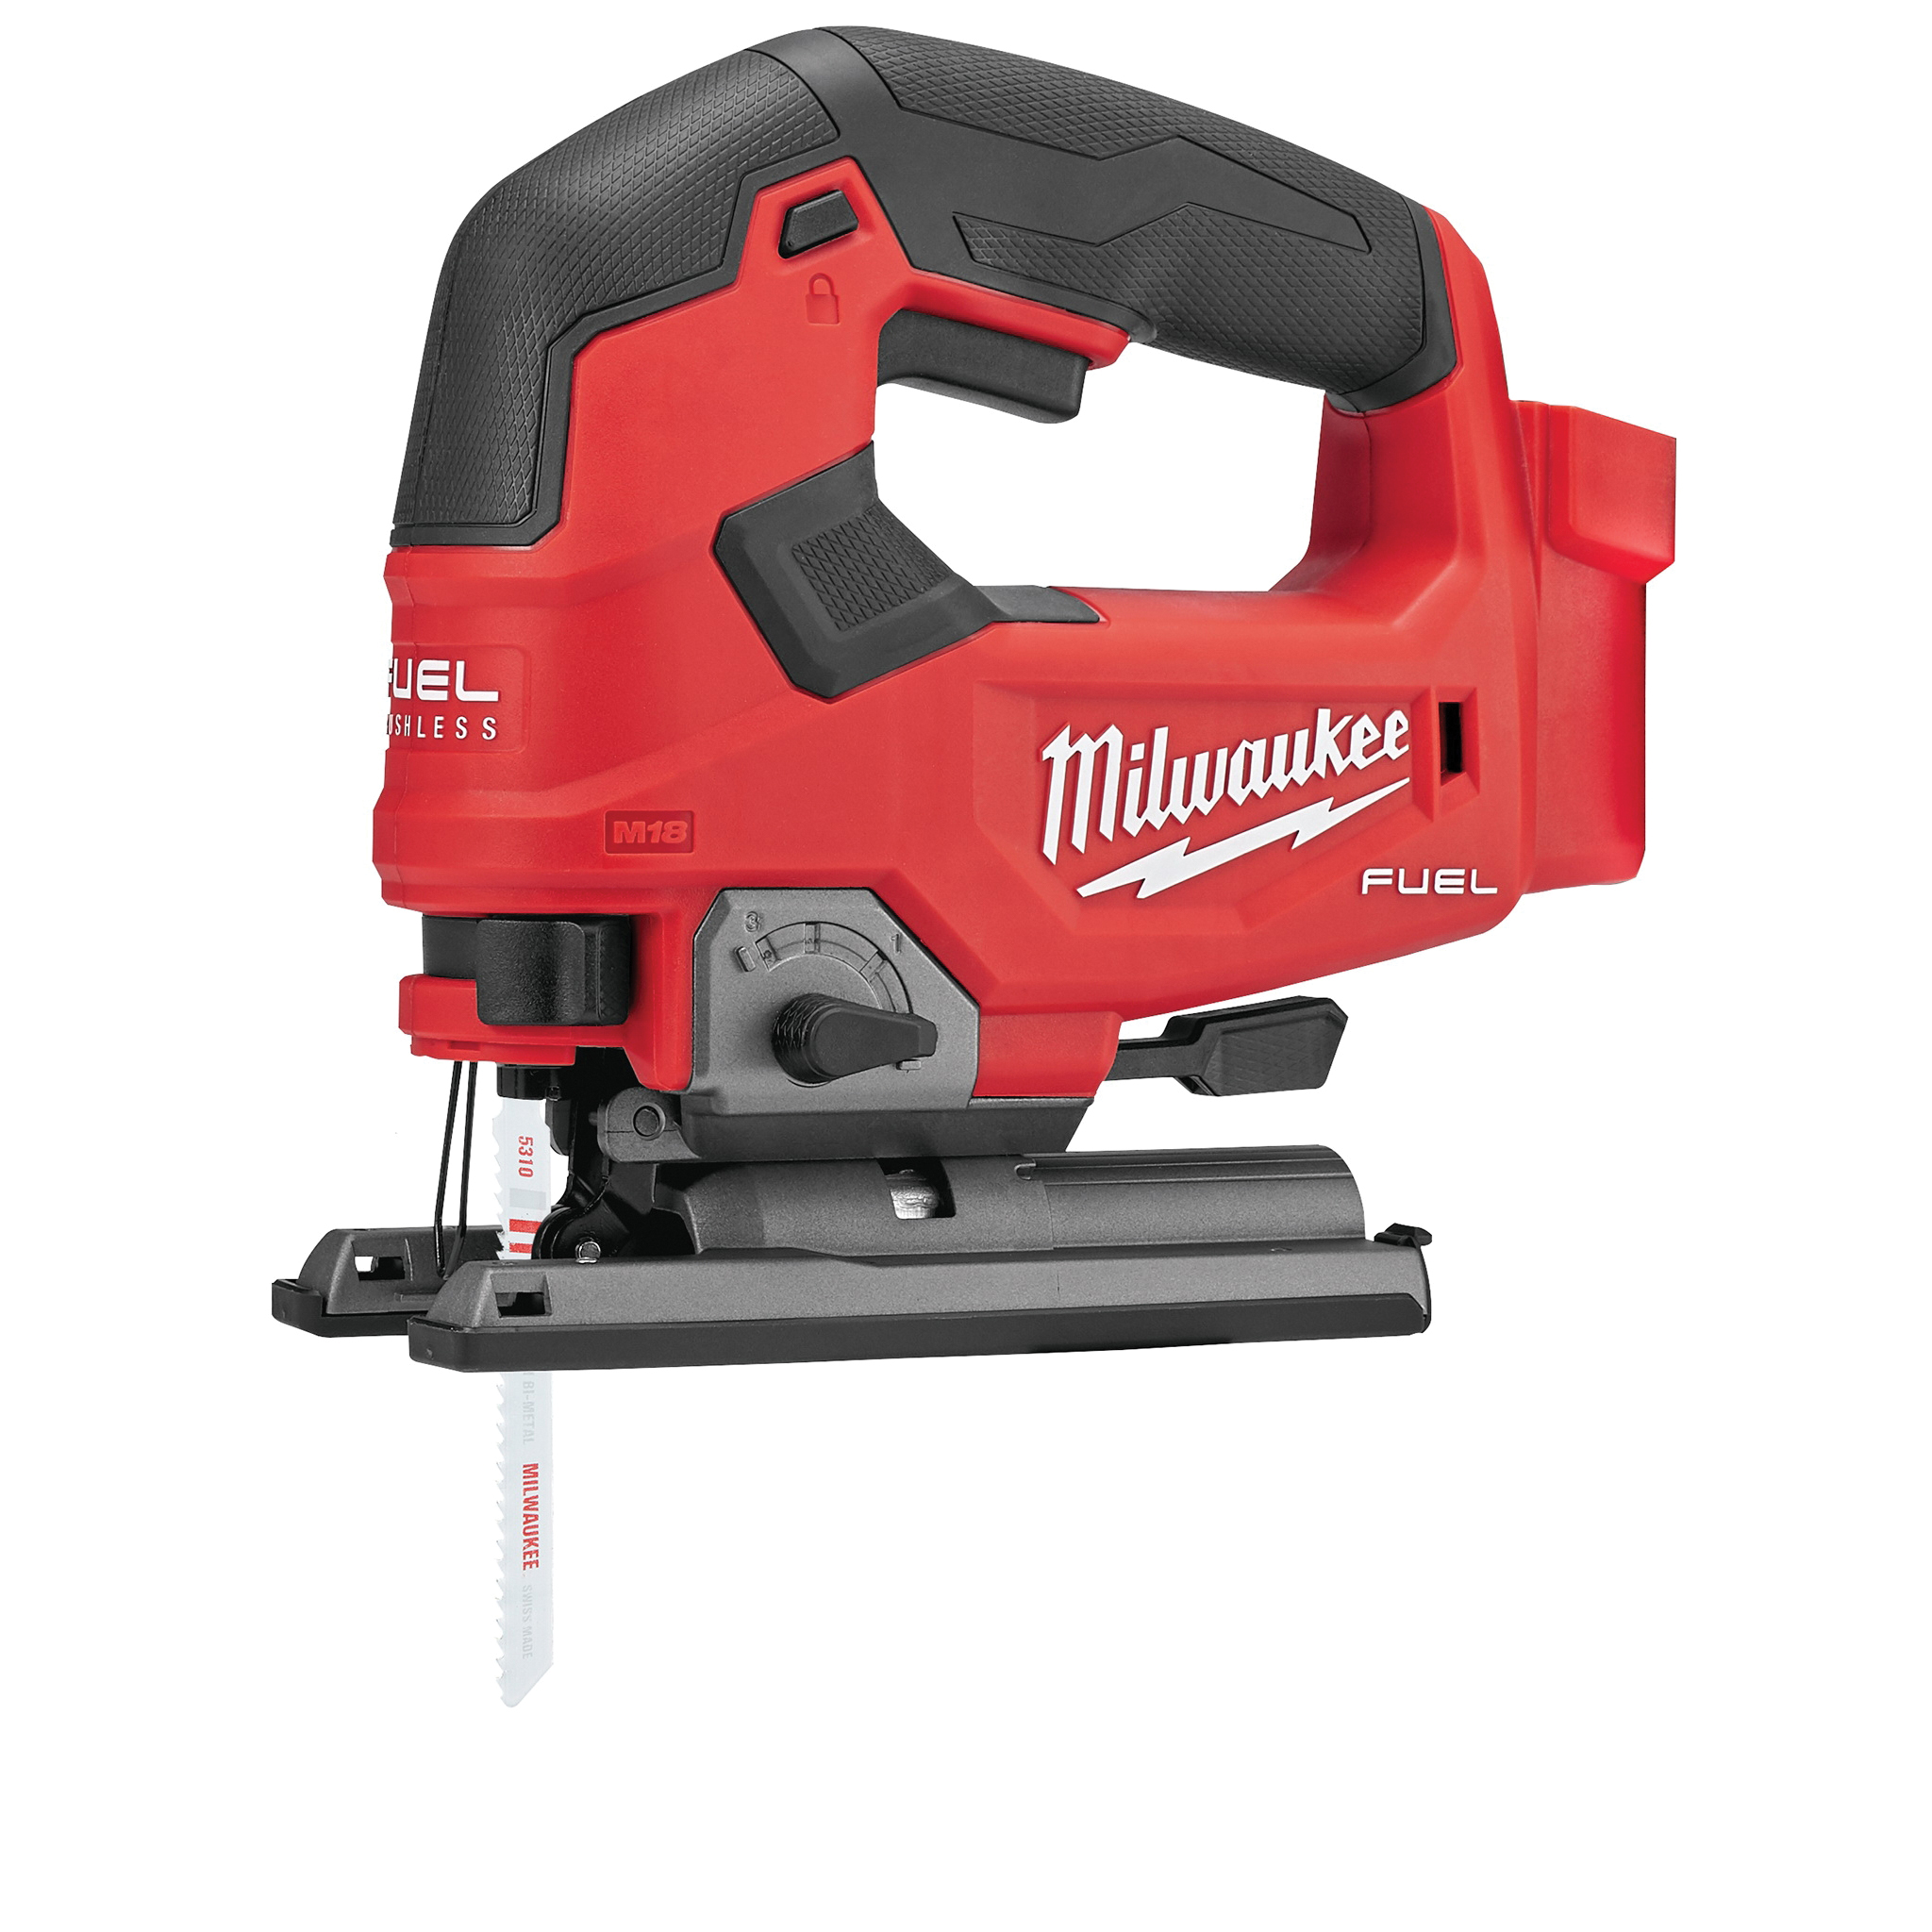 Milwaukee 2737-20 Jig Saw, Tool Only, 18 V, 5 Ah, 5-1/2 in Wood Cutting Capacity, 1 in L Stroke, 3500 spm - 2